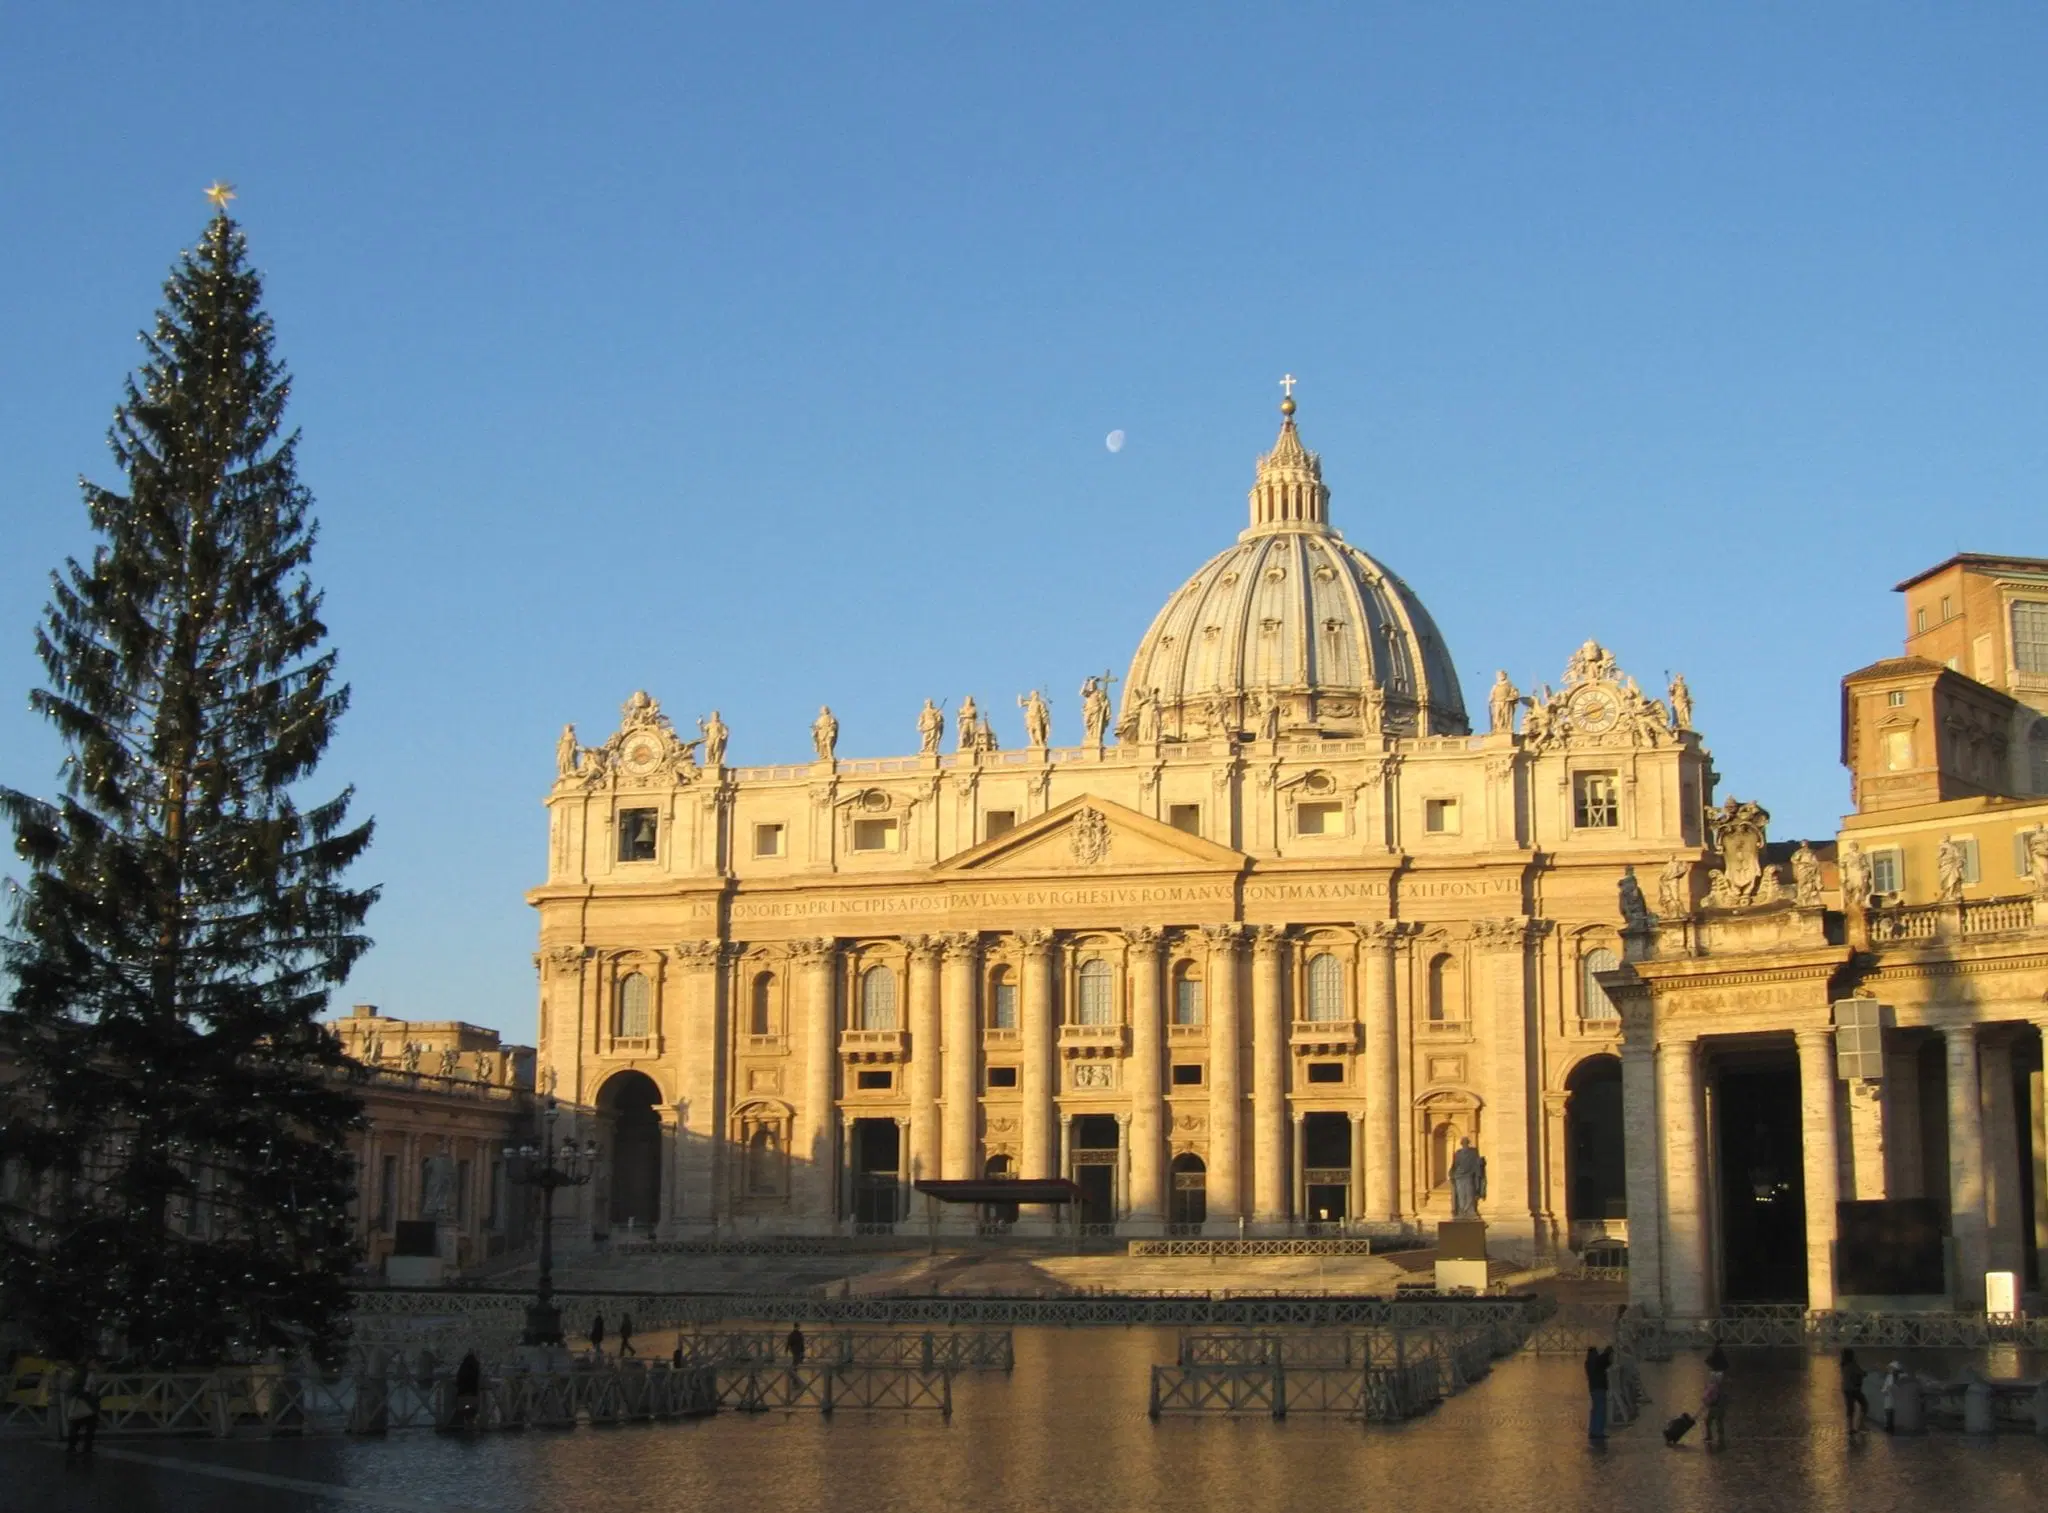 How Old Is St. Peter’s Basilica